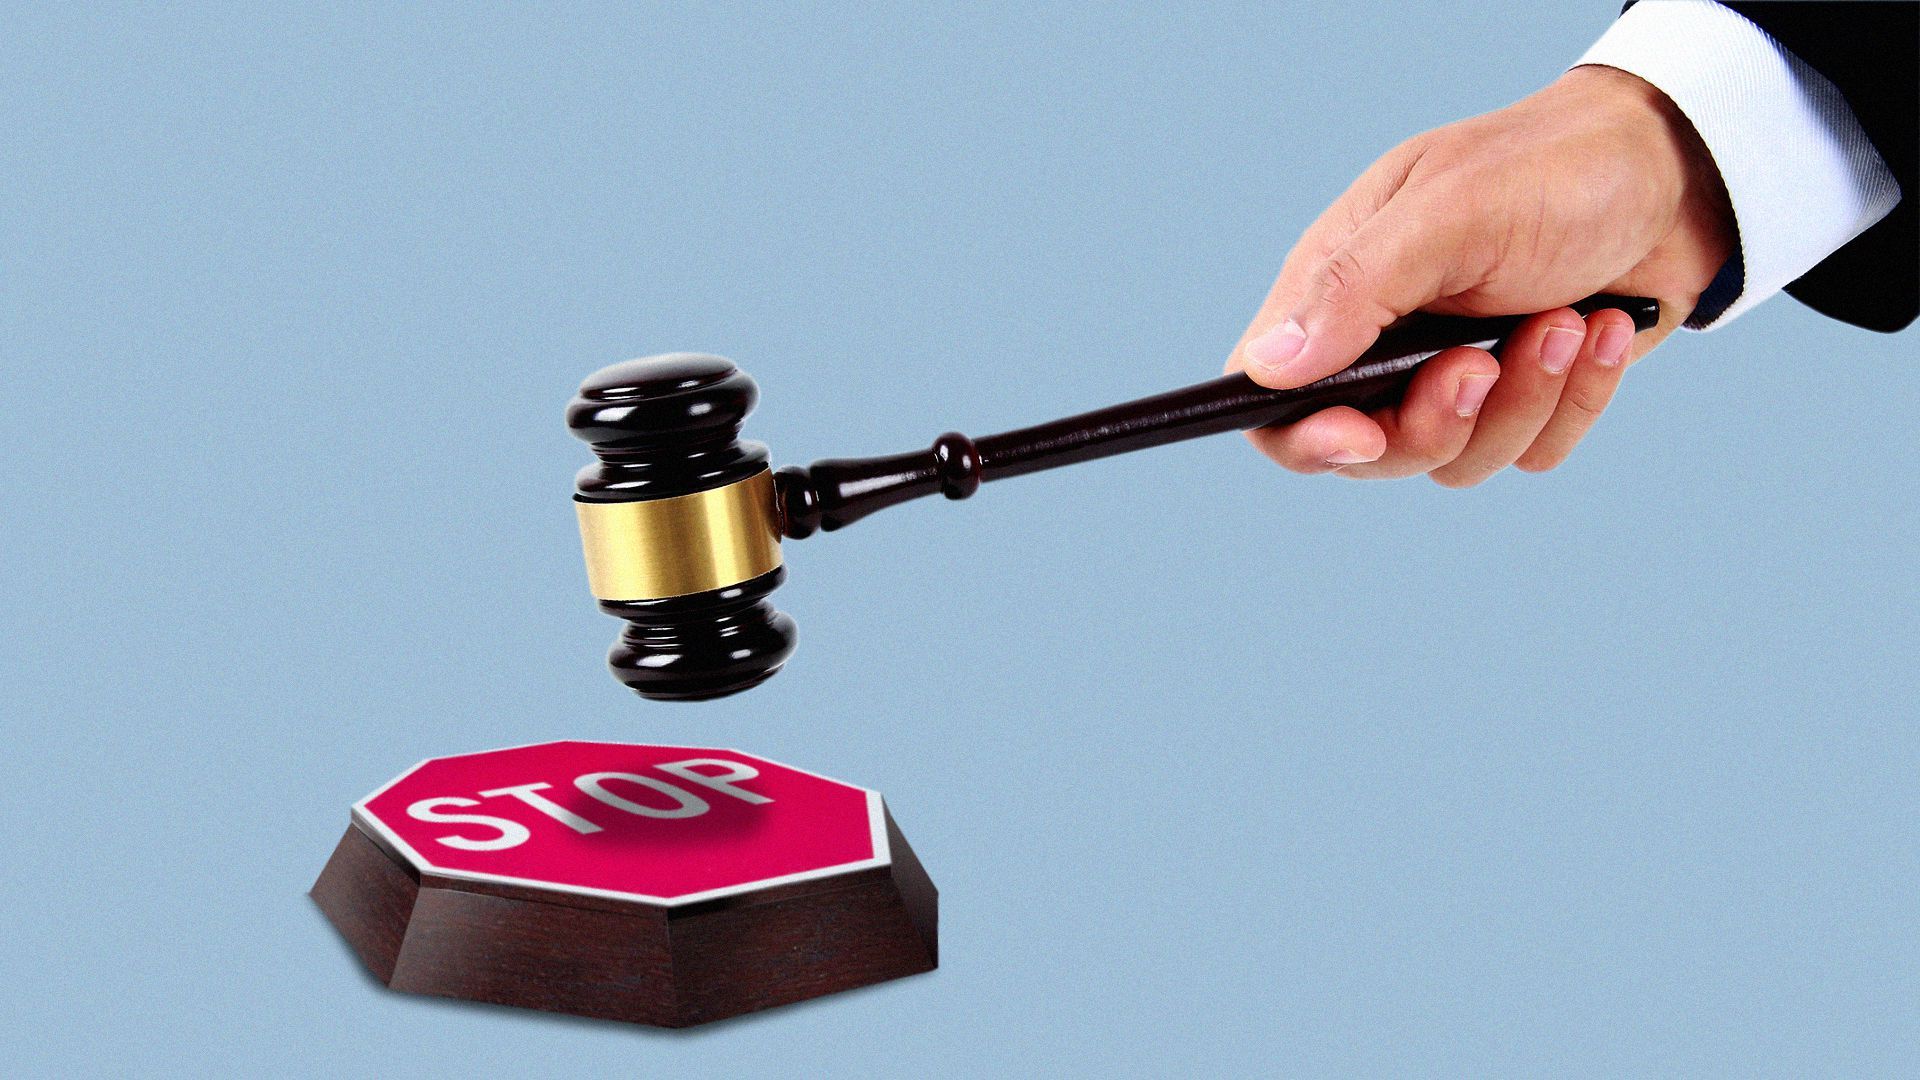 Hand holding gavel about to hit a stop sign block.